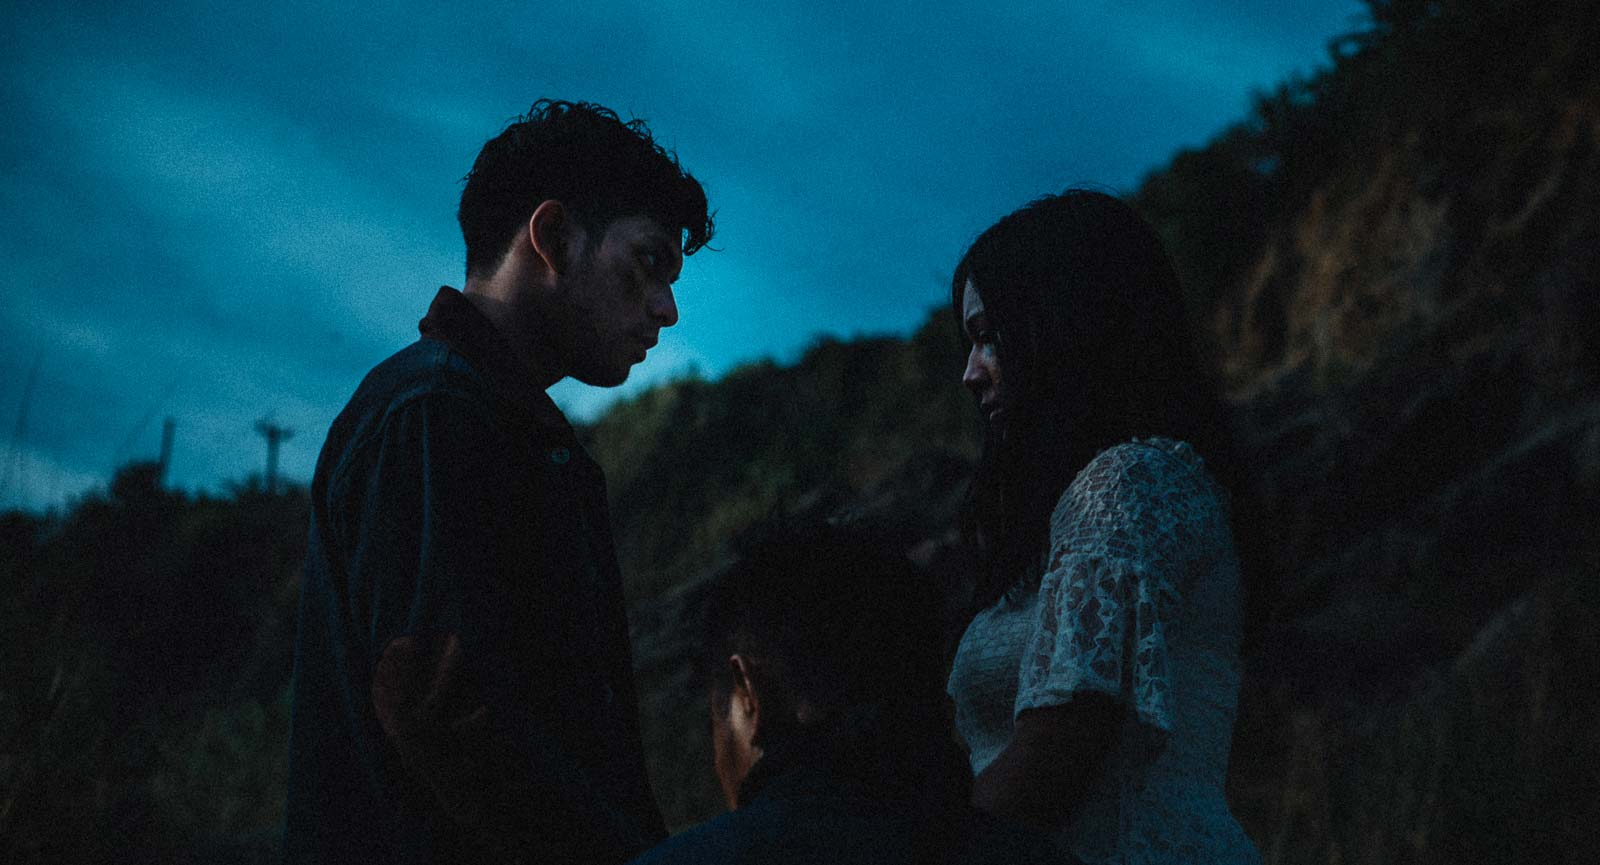 Gusty Pratama and Agnes Naomi in Dan Kembali Bermimpi (A Trip to Malilo), directed by Jason Iskandar & produced by Florence Giovani (Studio Antelope).